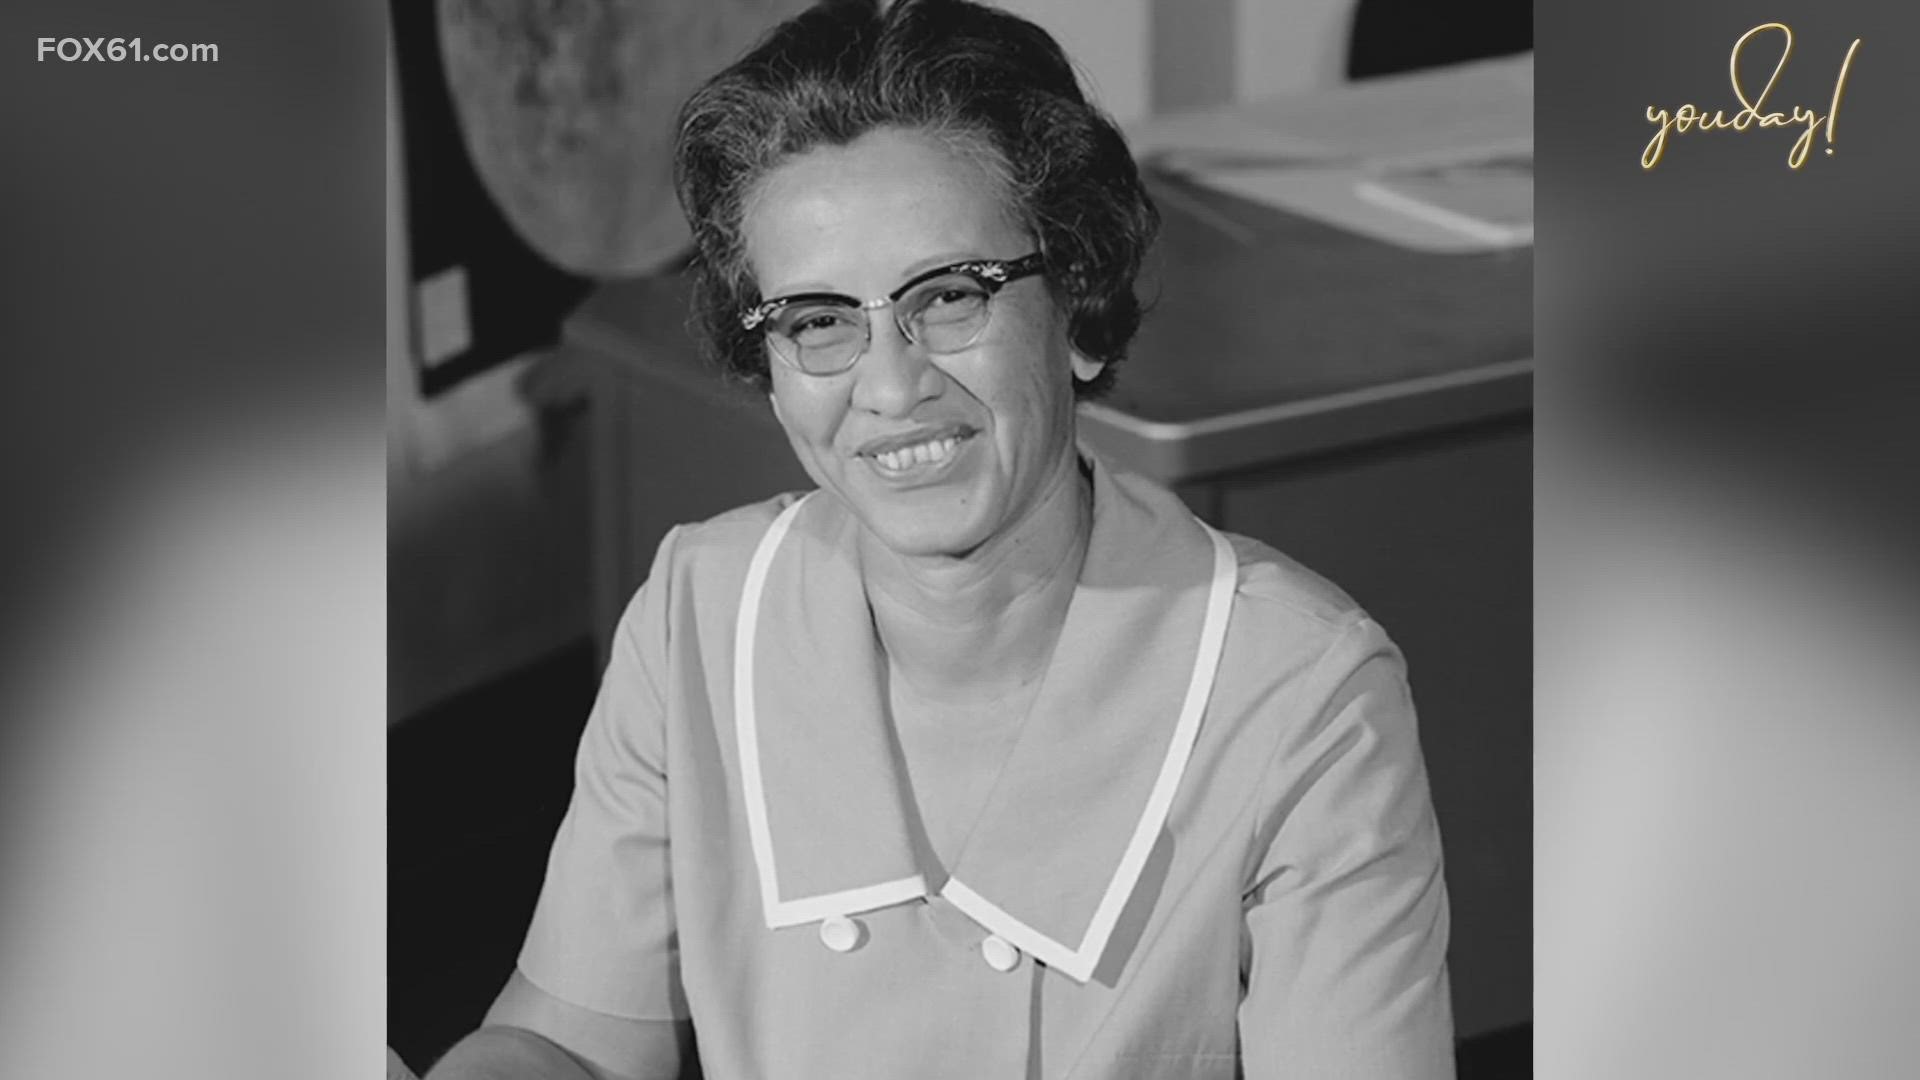 For Black History Month, Coach LaMonte highlights mathematician Katherine Johnson on YouDay.